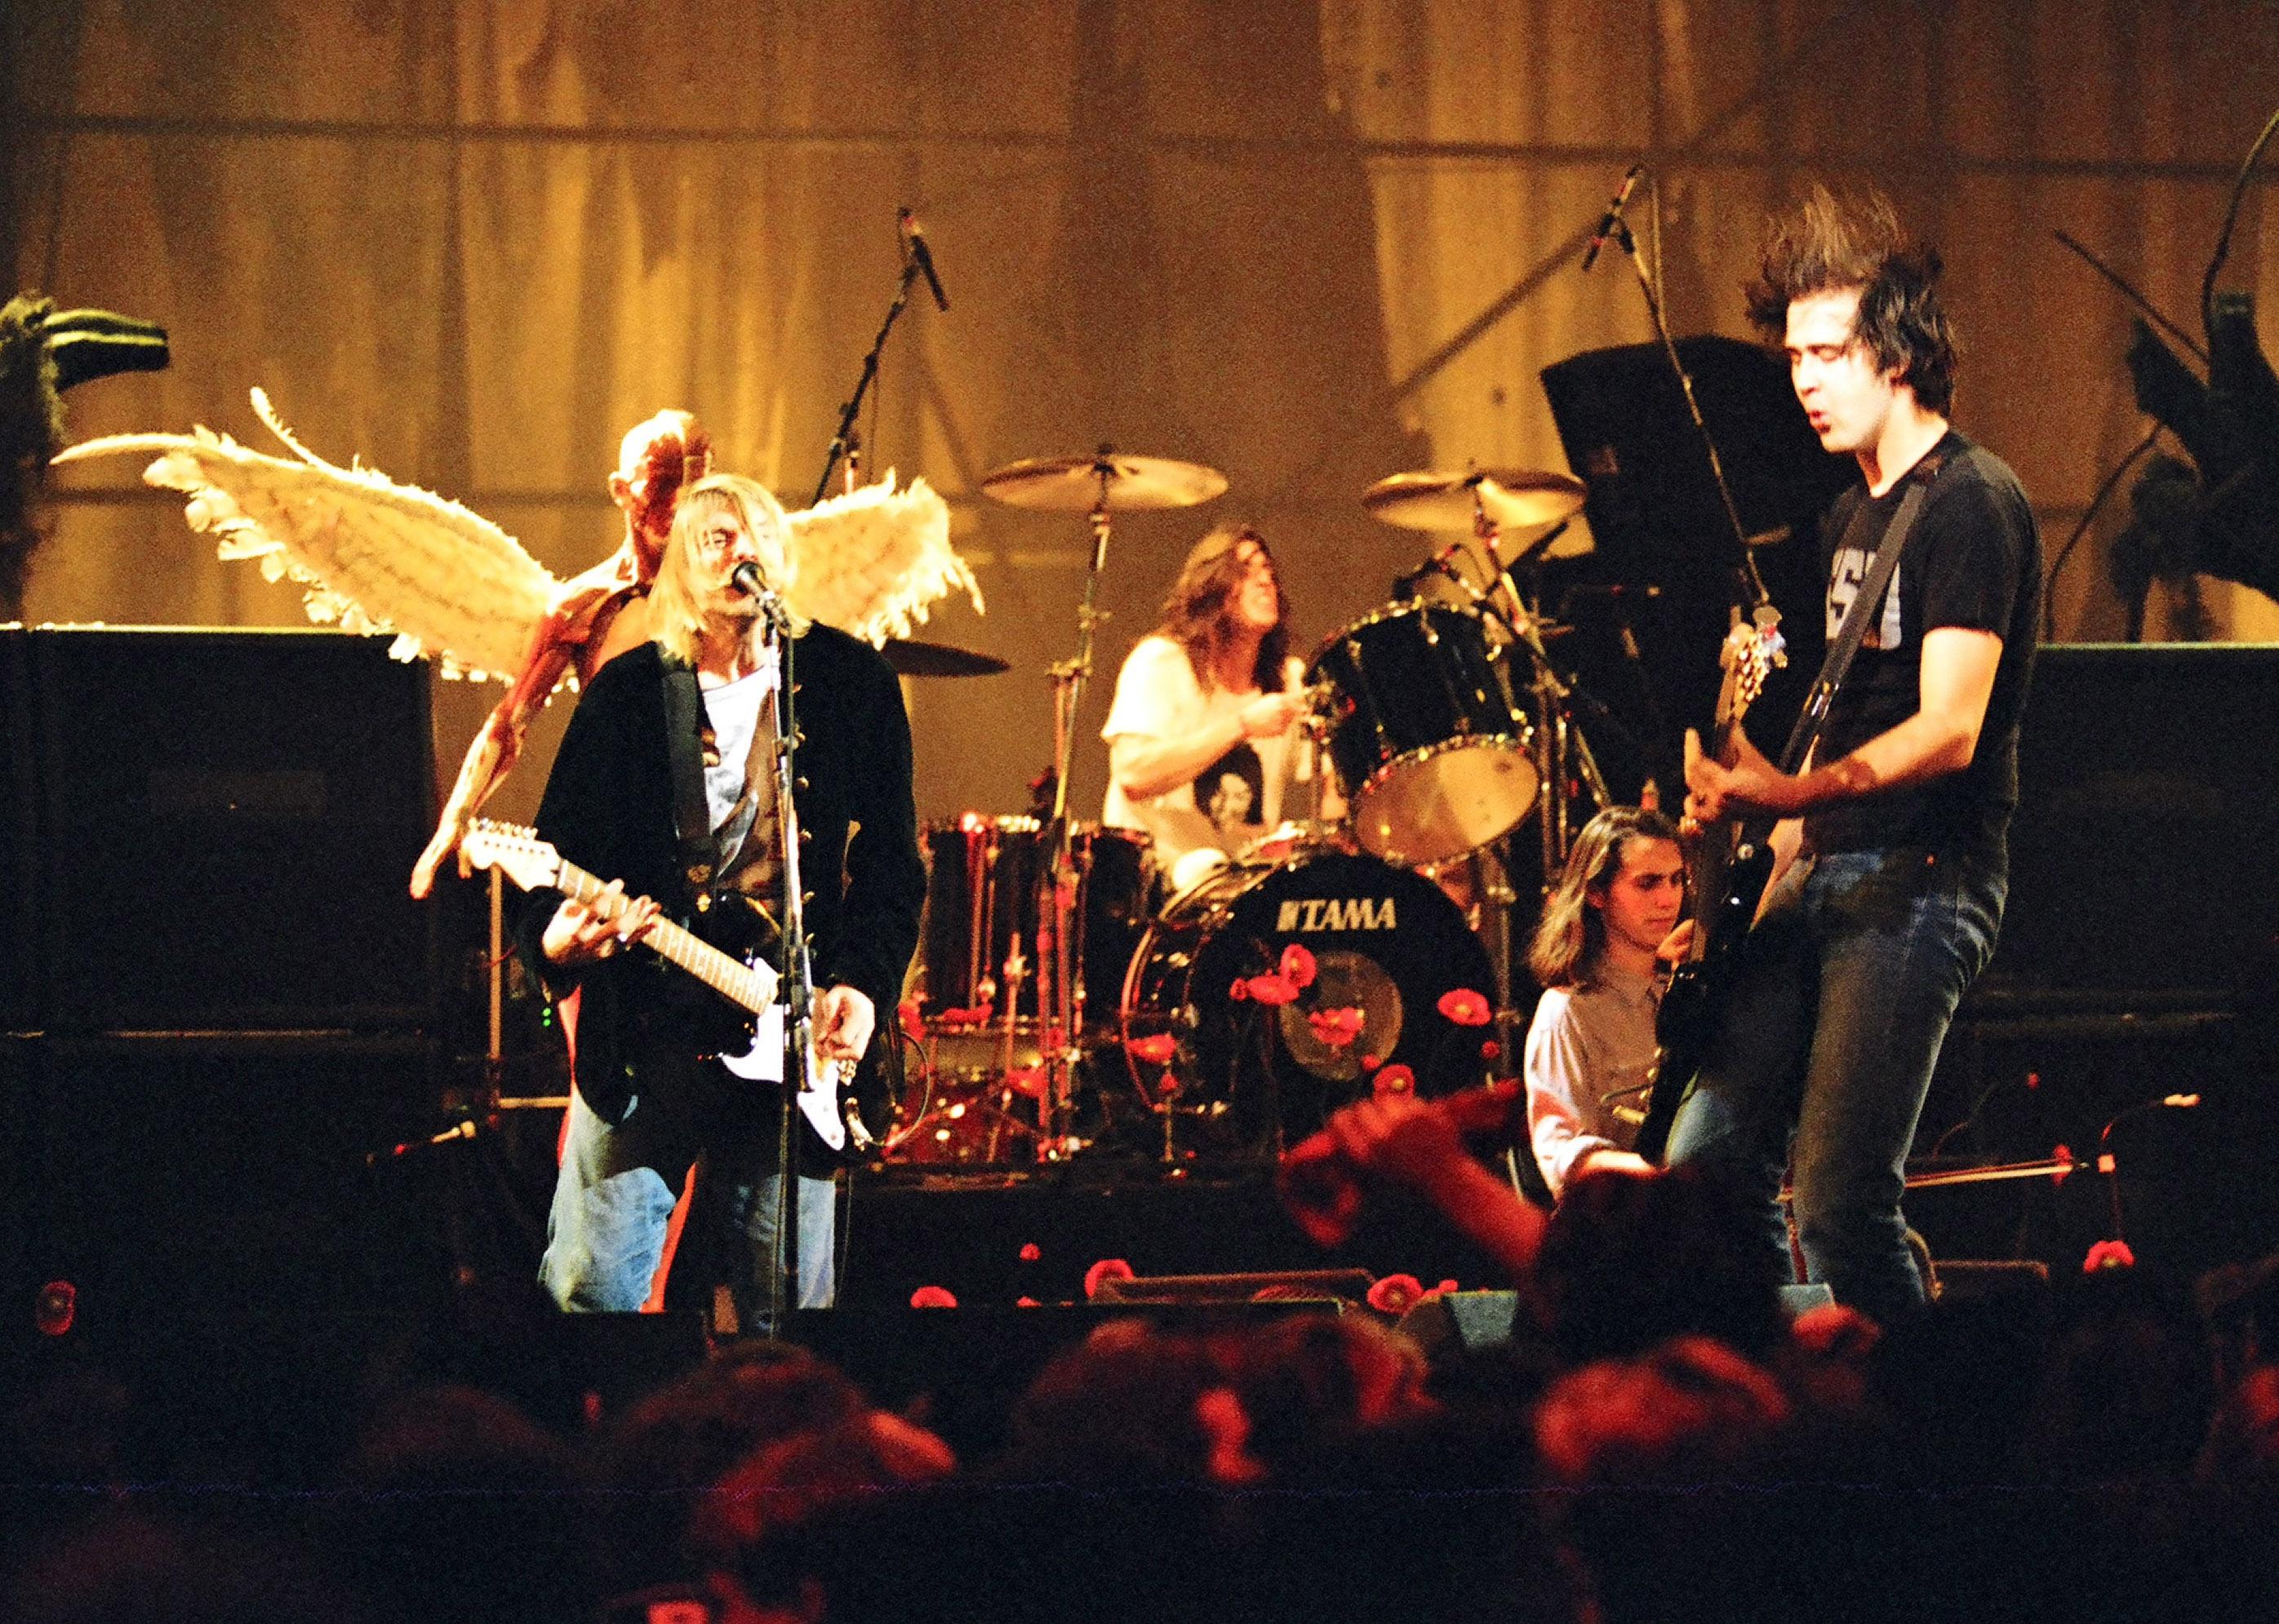 Kurt Cobain, Dave Grohl, and Krist Novoselic of Nirvana performing onstage.